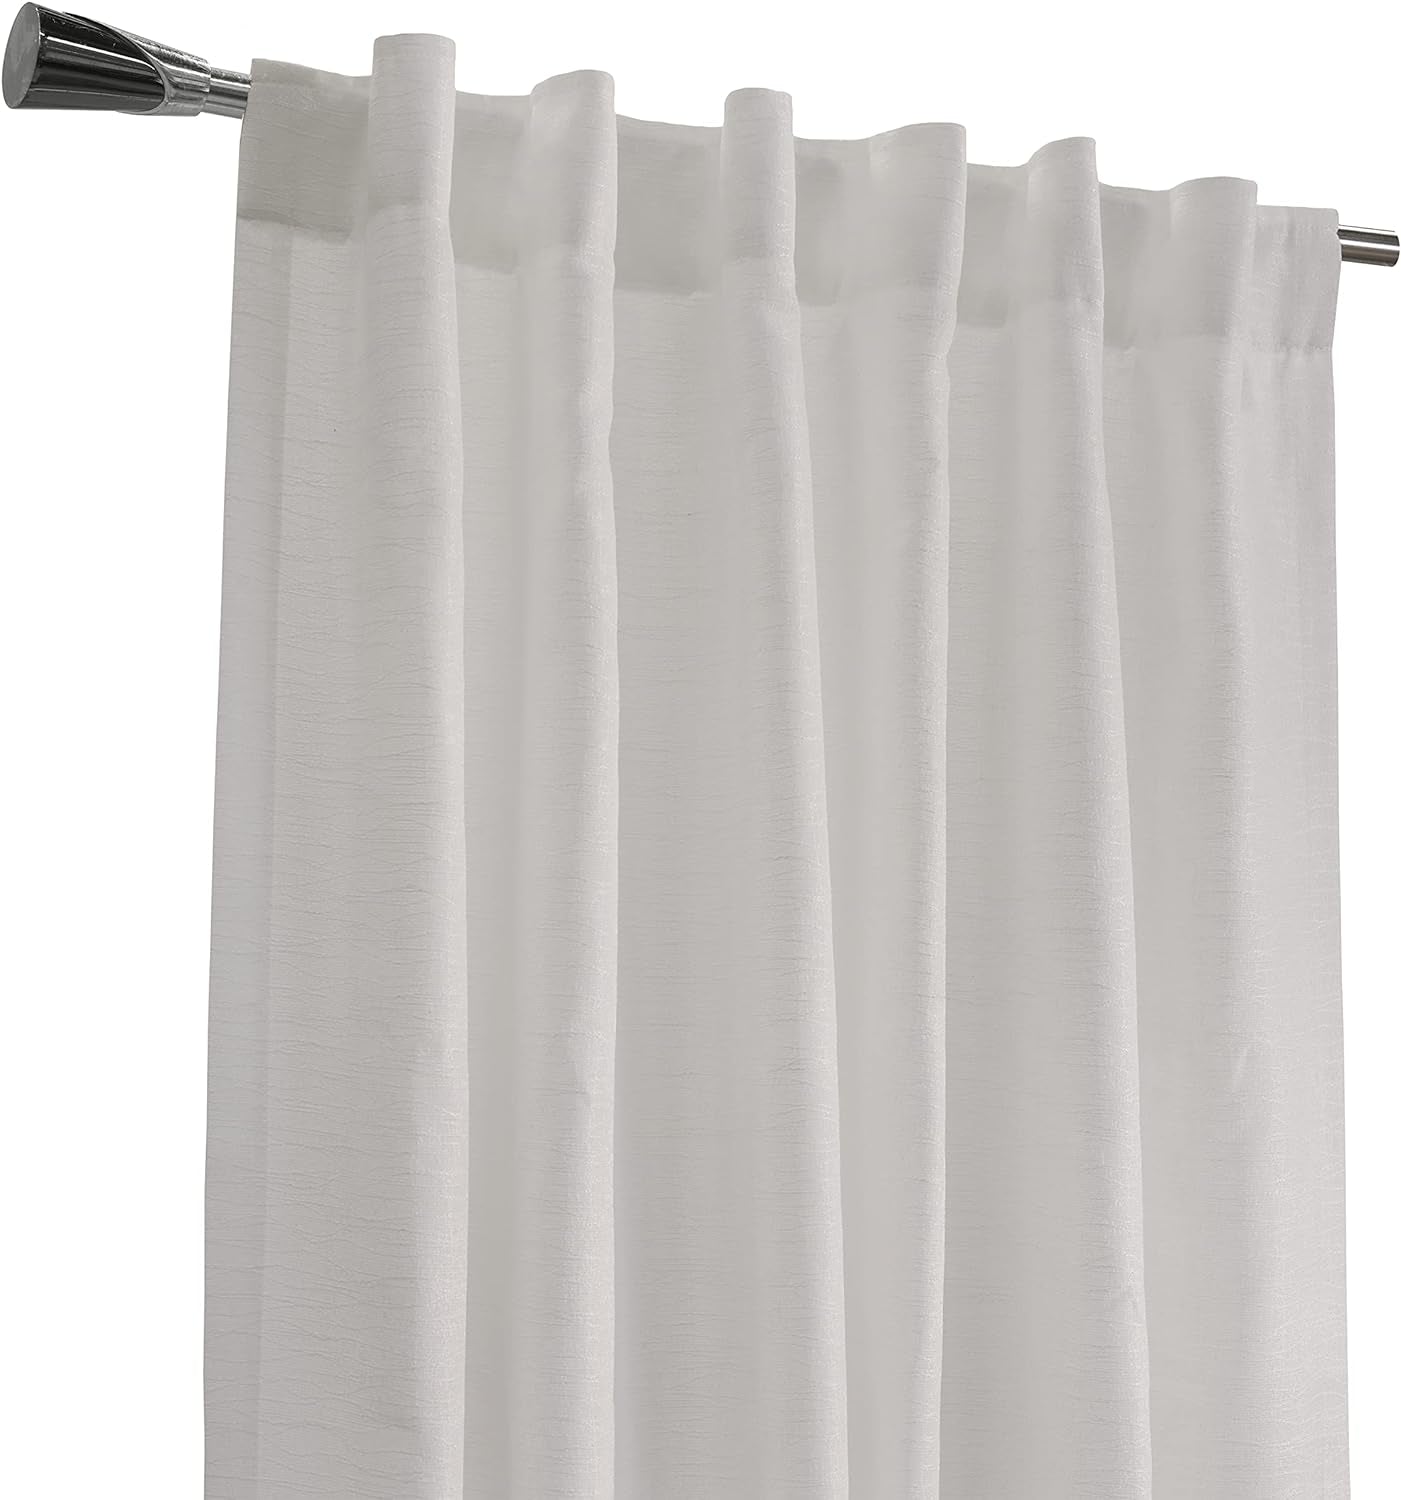 Loft Living Davos Textered Jacquard Dual Header Curtain Panel 52" X 84" in Off-White  Commonwealth Home Fashions   